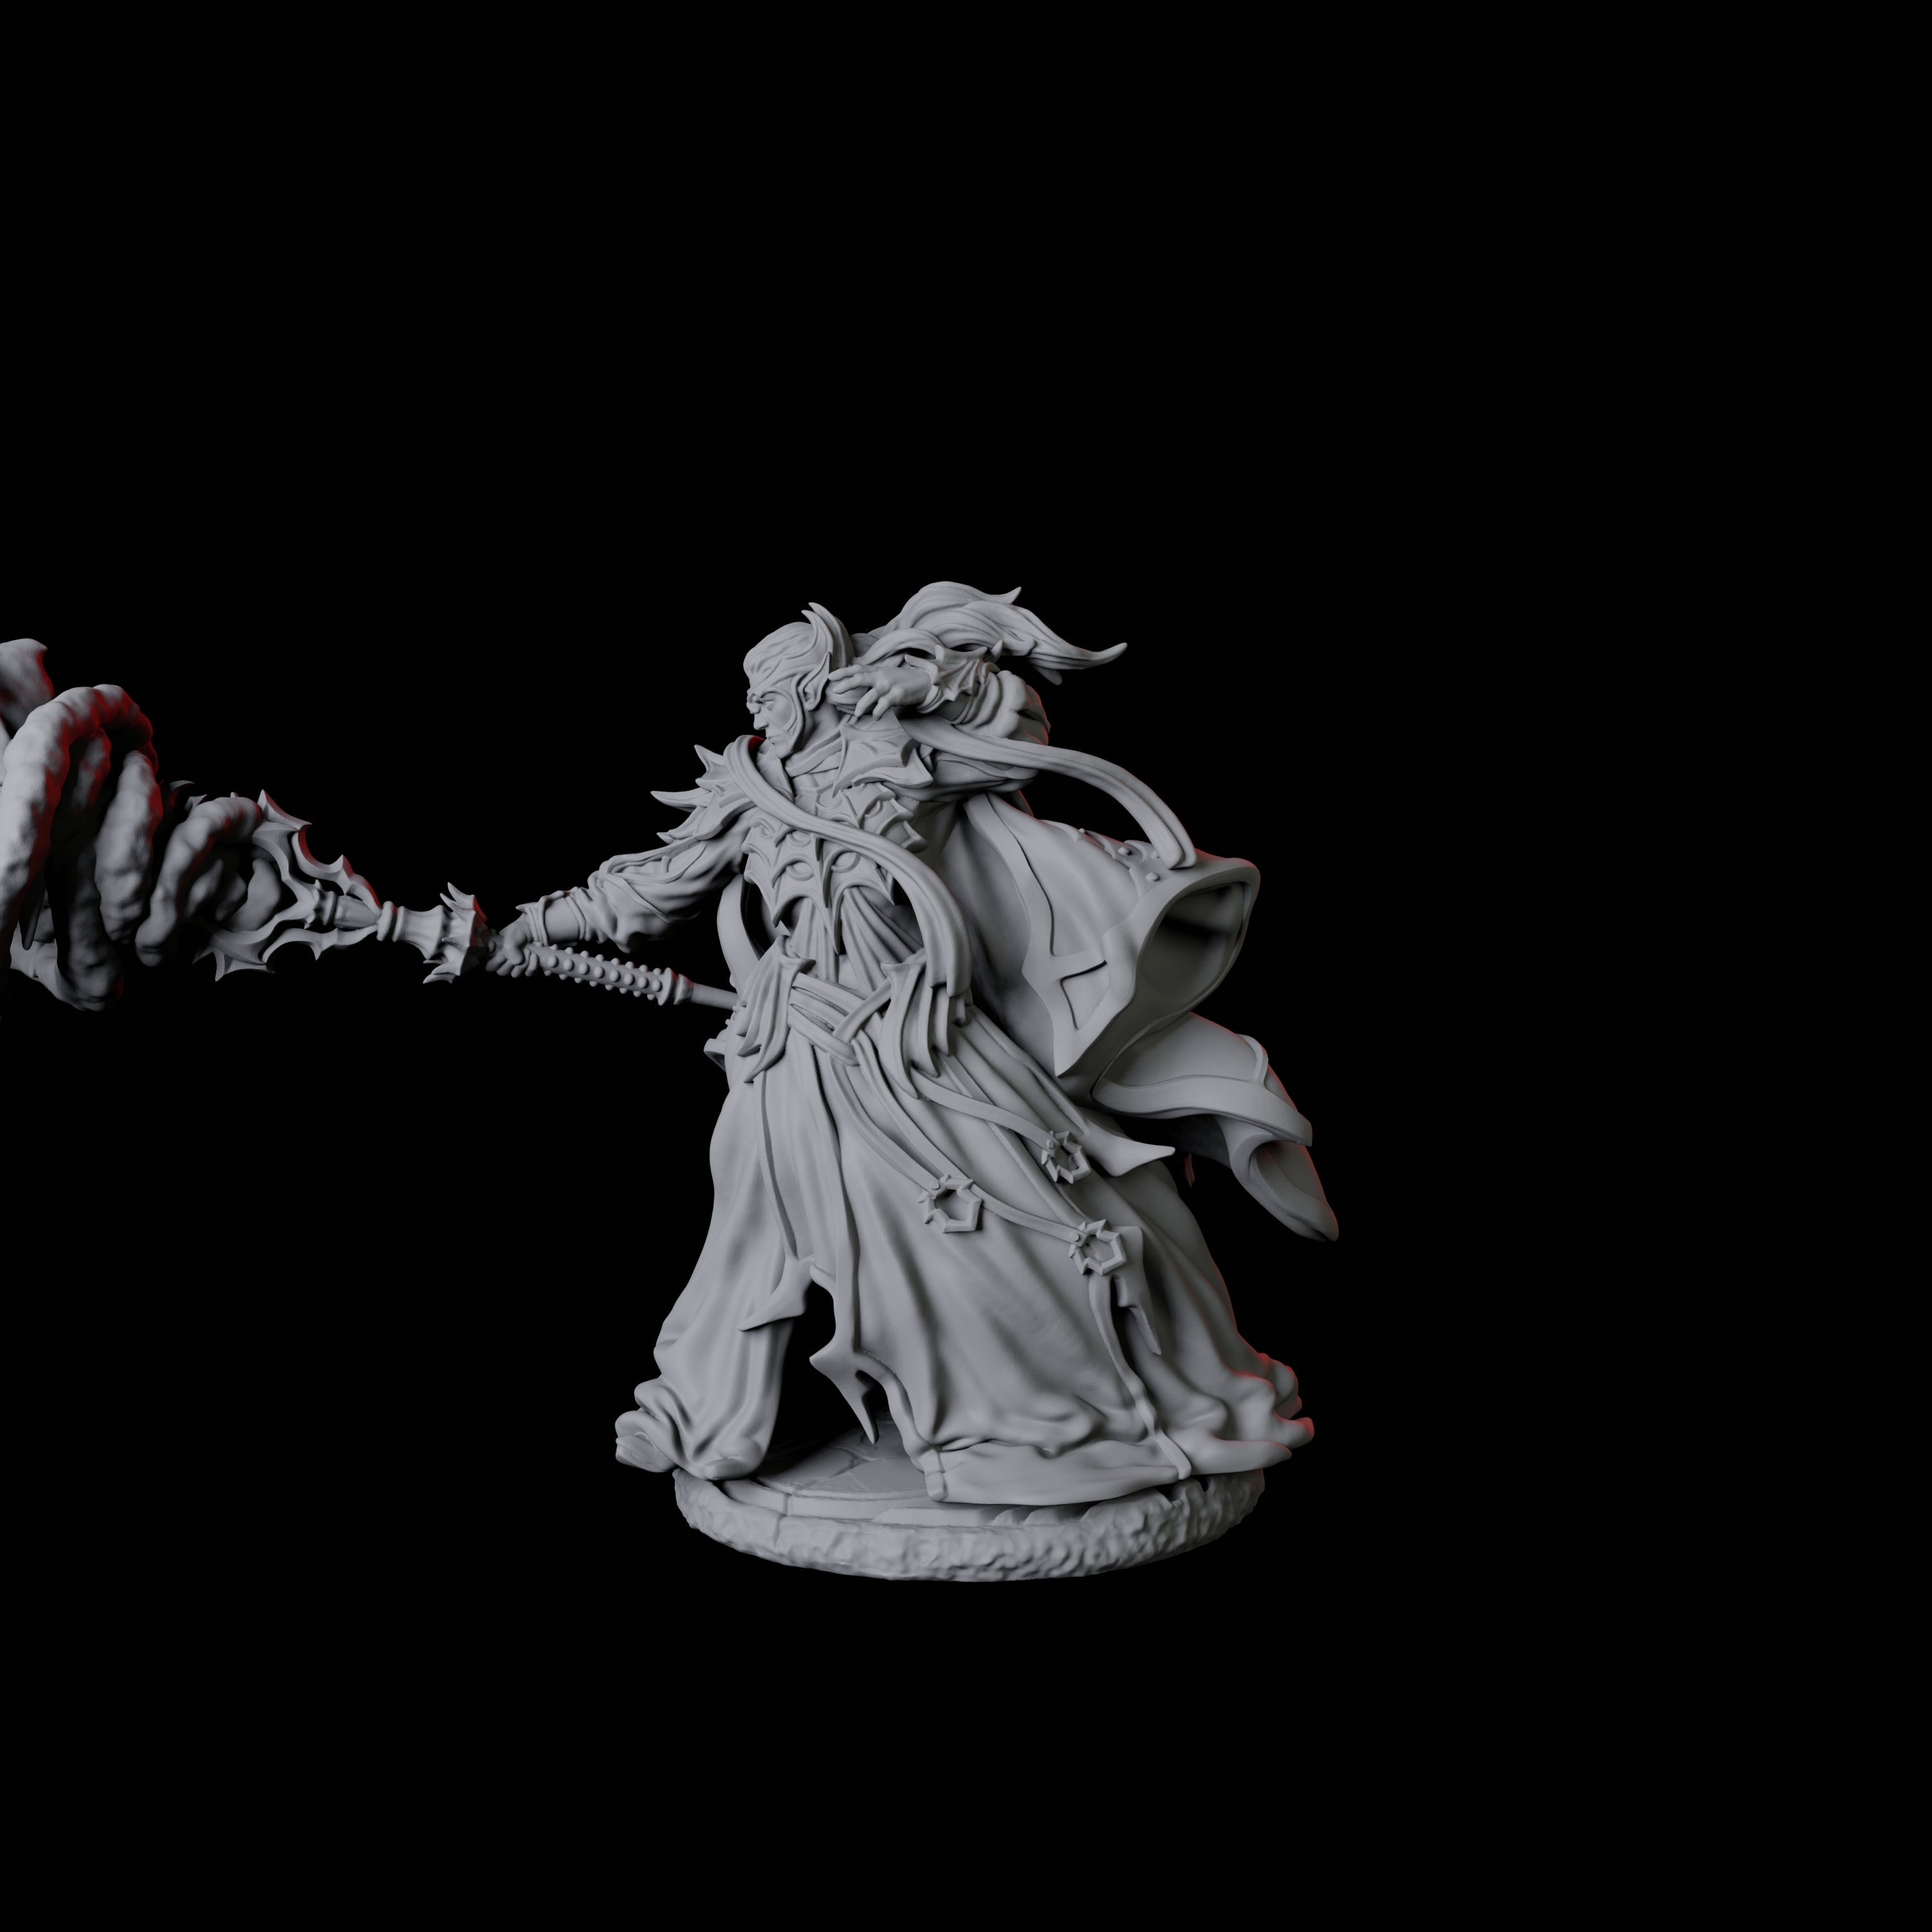 Spider Mage Miniature for Dungeons and Dragons, Pathfinder or other TTRPGs